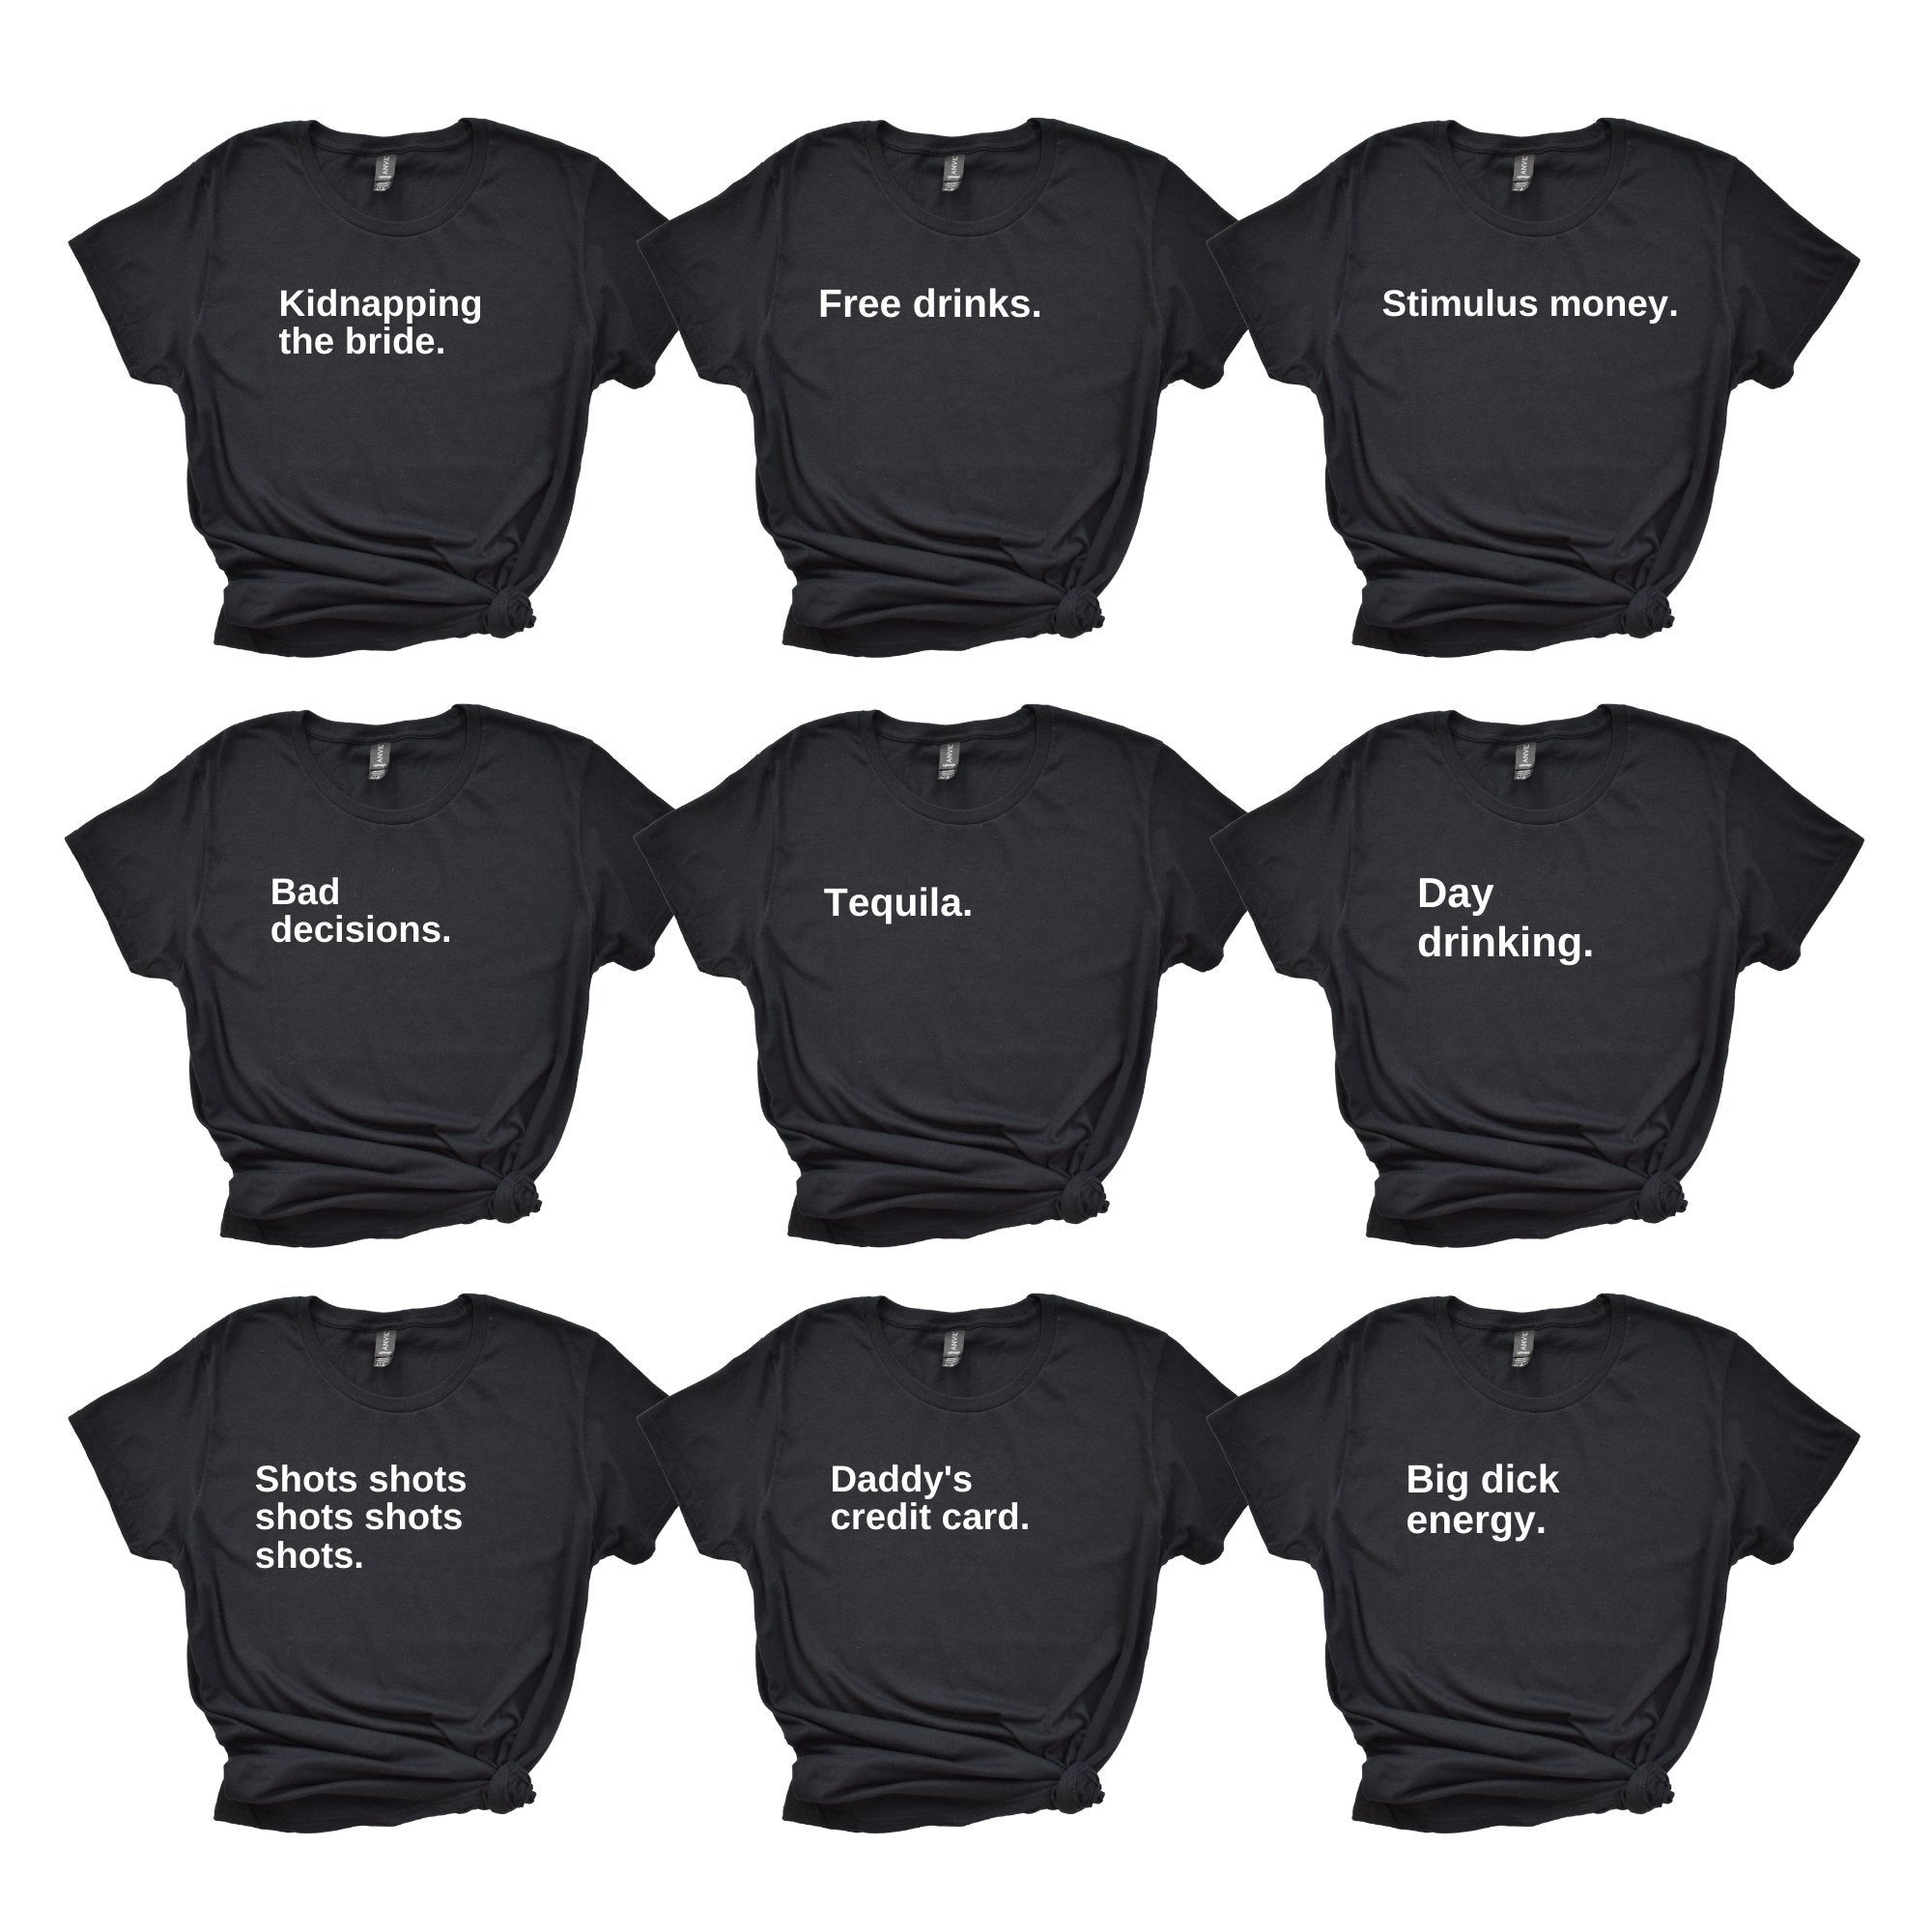 Black & white t-shirts that read like Cards Against Humanity cards